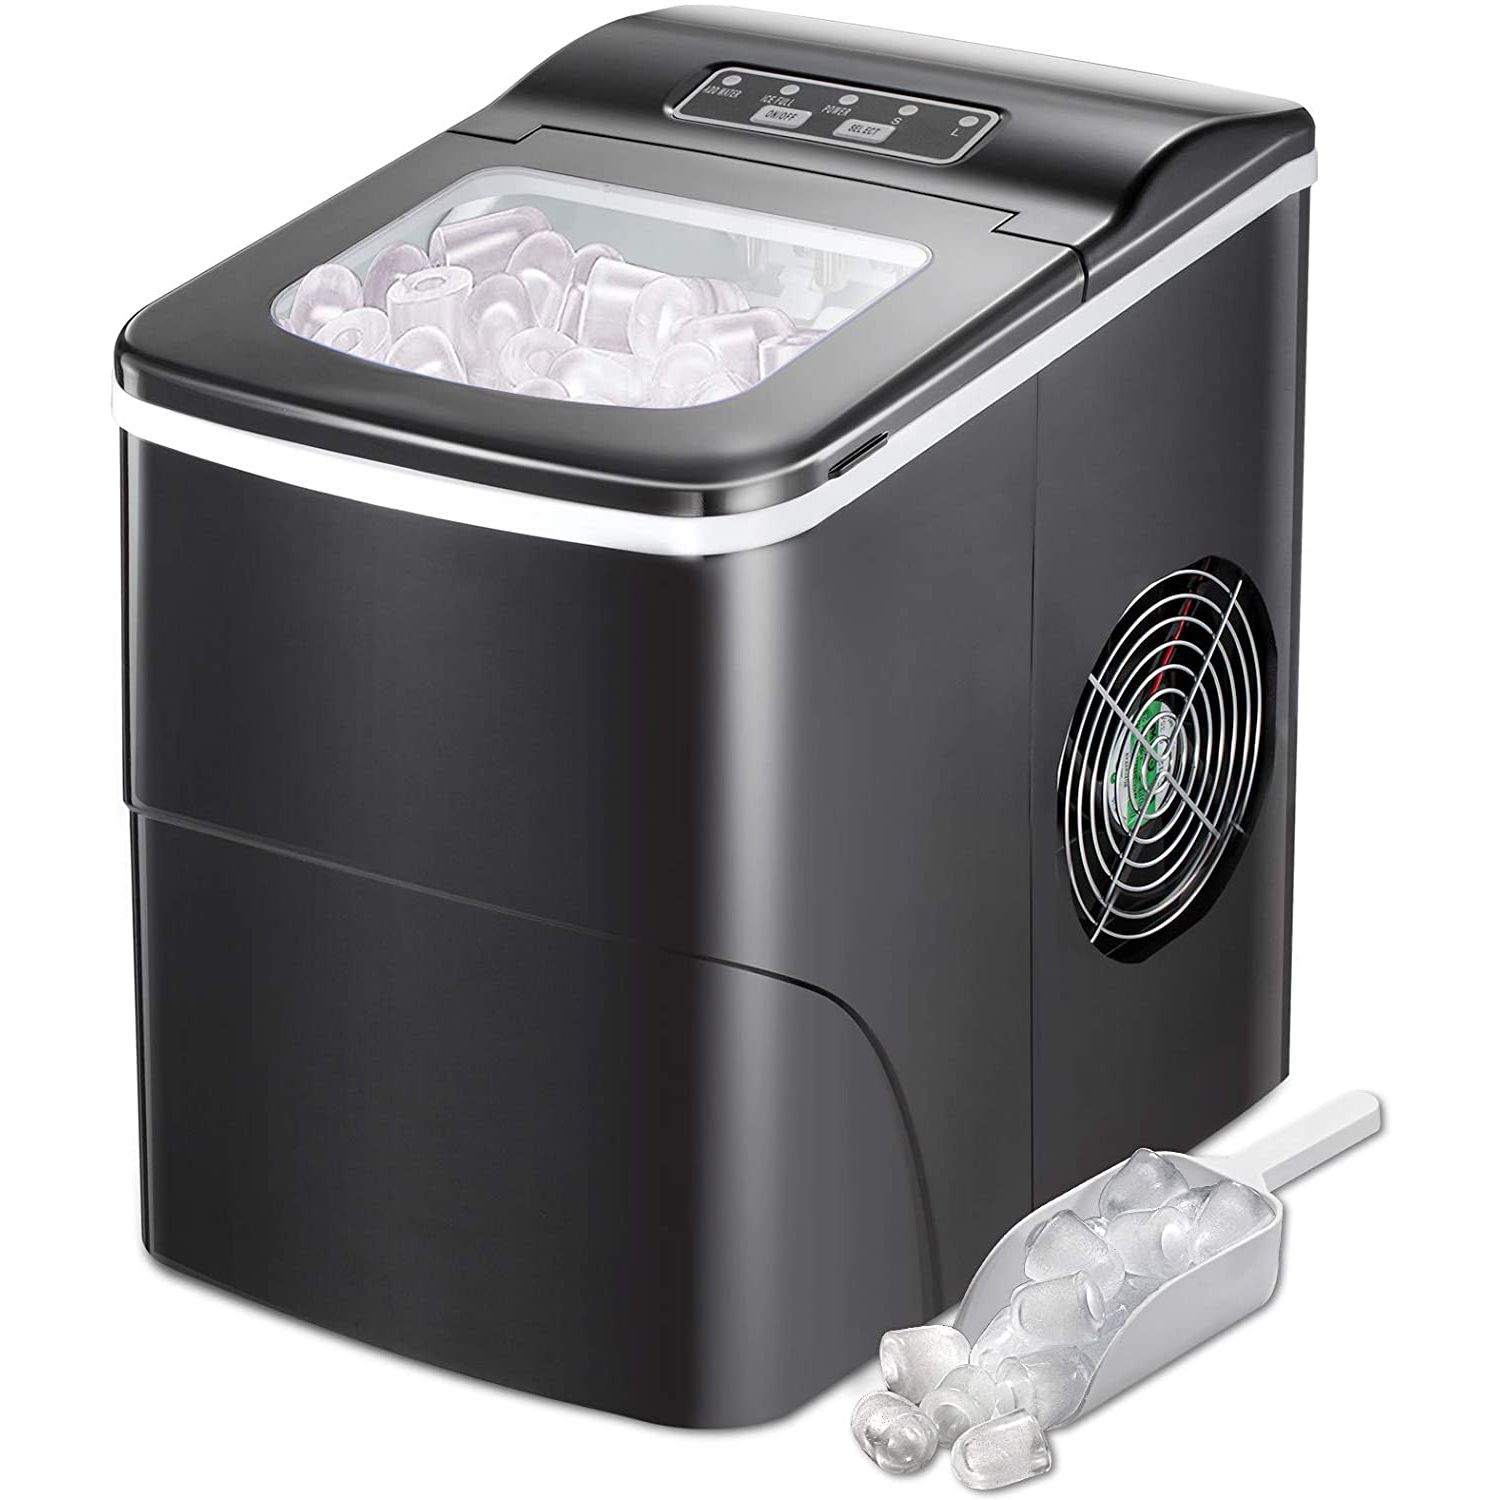 AGlucky Ice Maker Machine on a white background